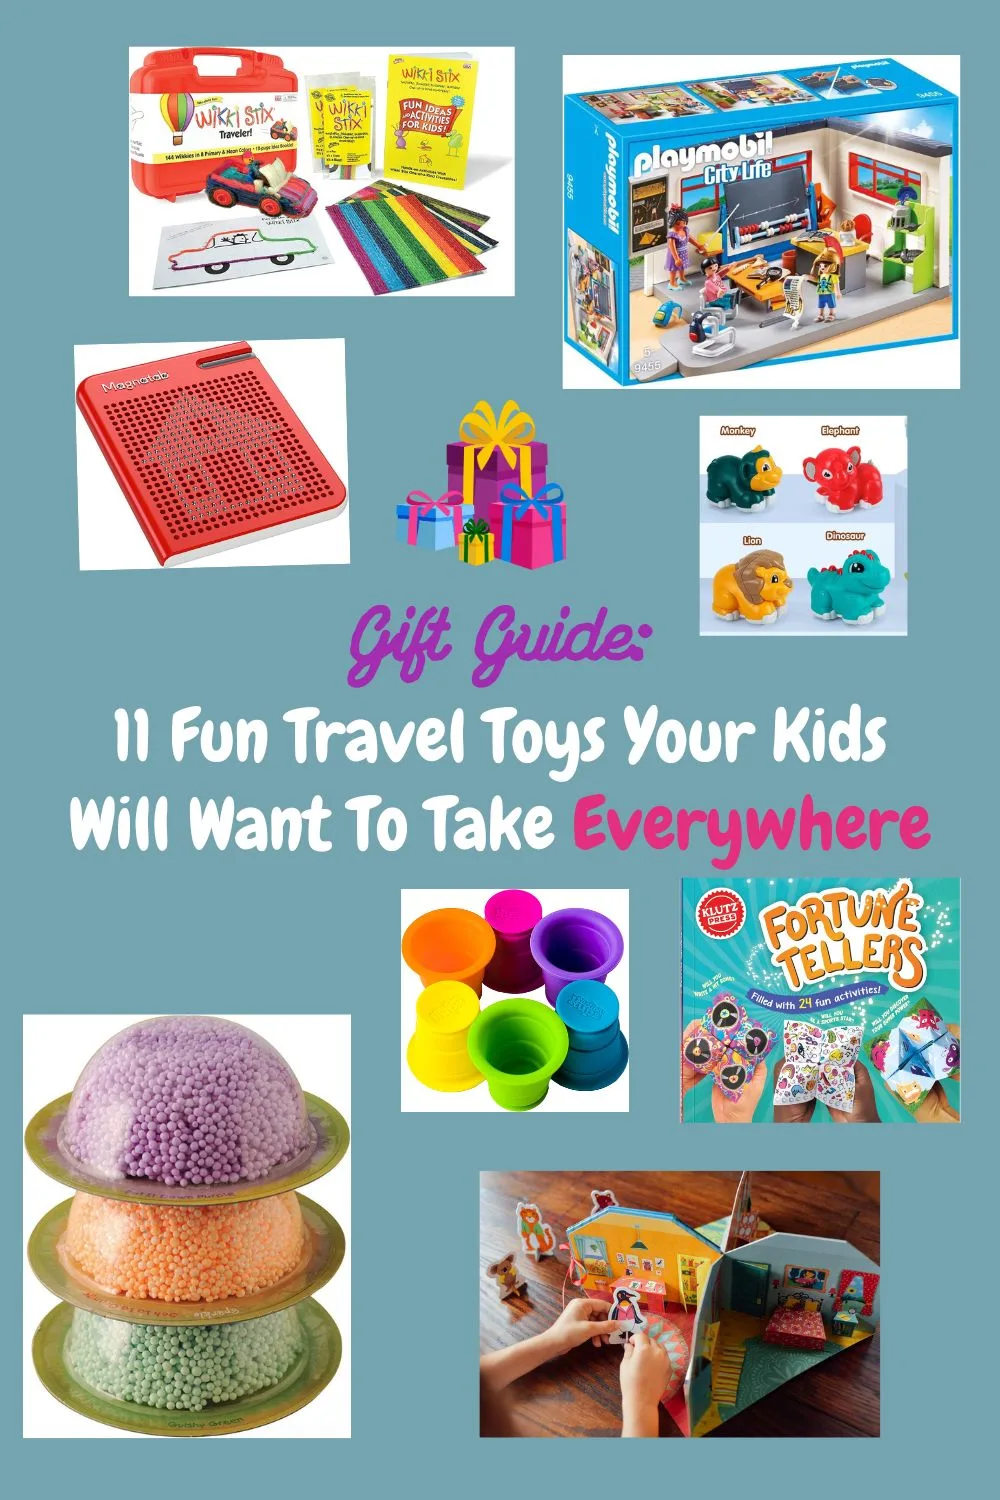 Best Travel Toys For Every Age Group - Babies to Tweens & Teens